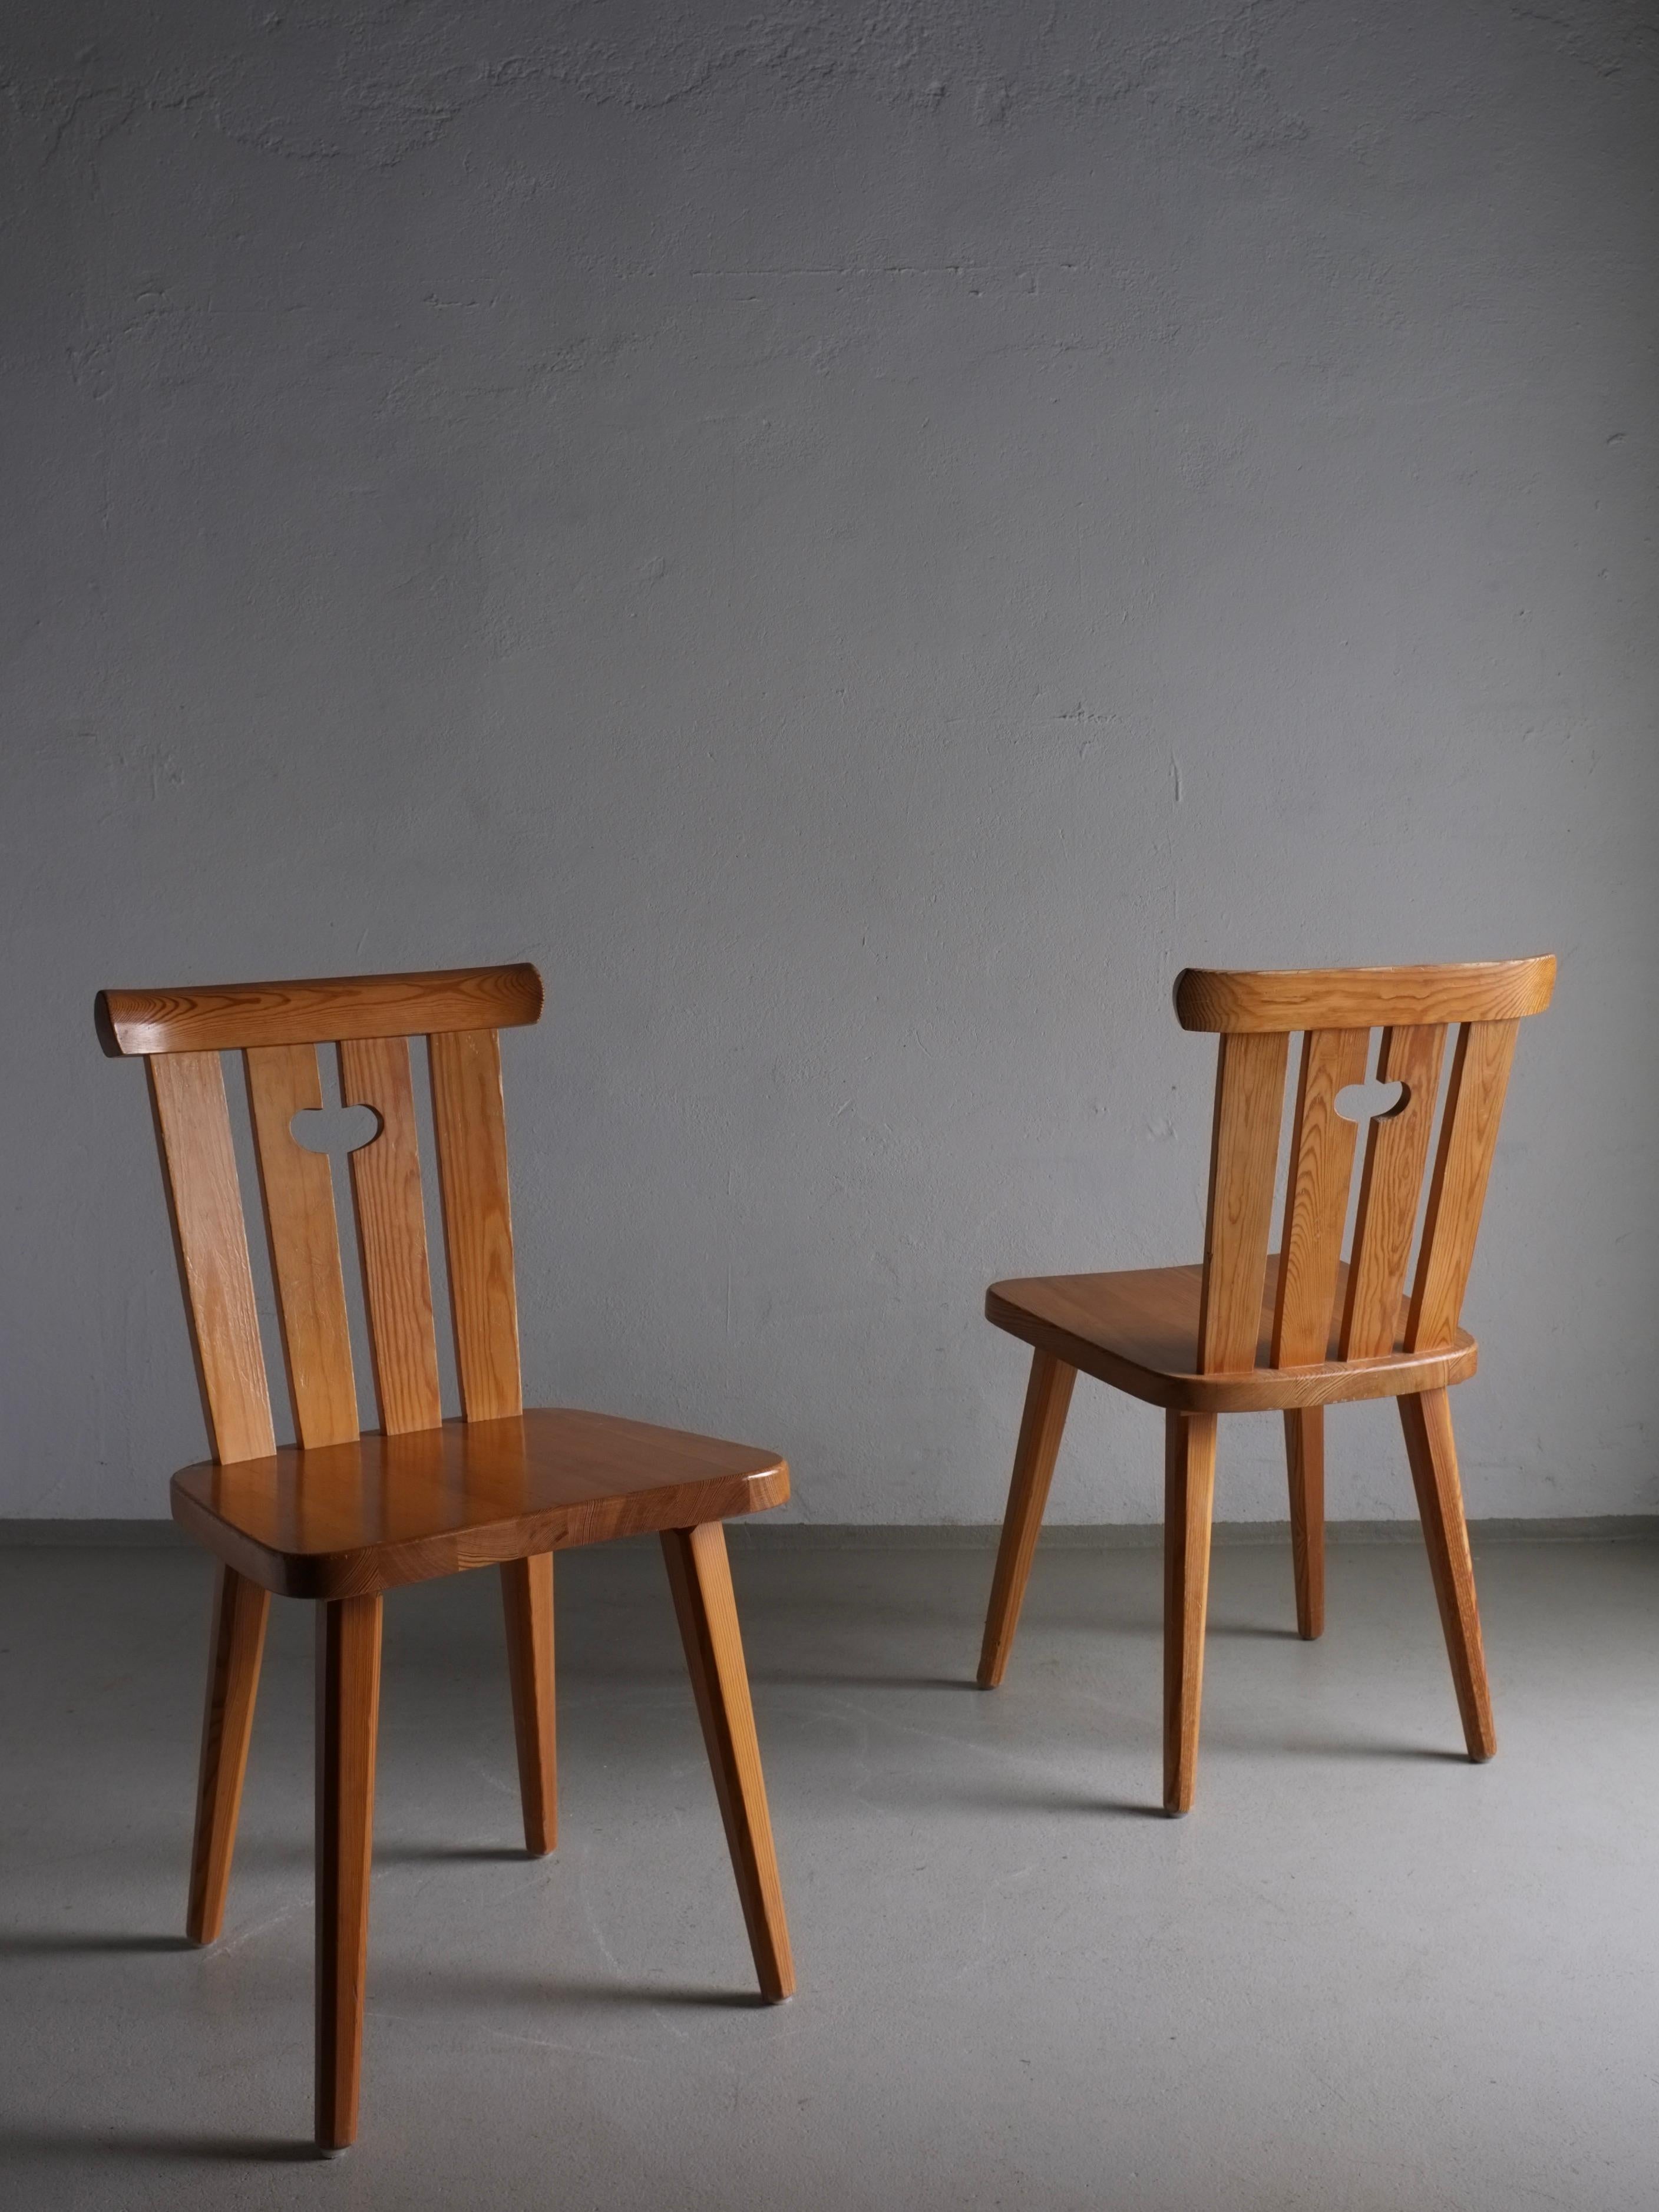 Set of 2 Solid Pine Chairs, Göran Malmvall, Sweden 1940s For Sale 2